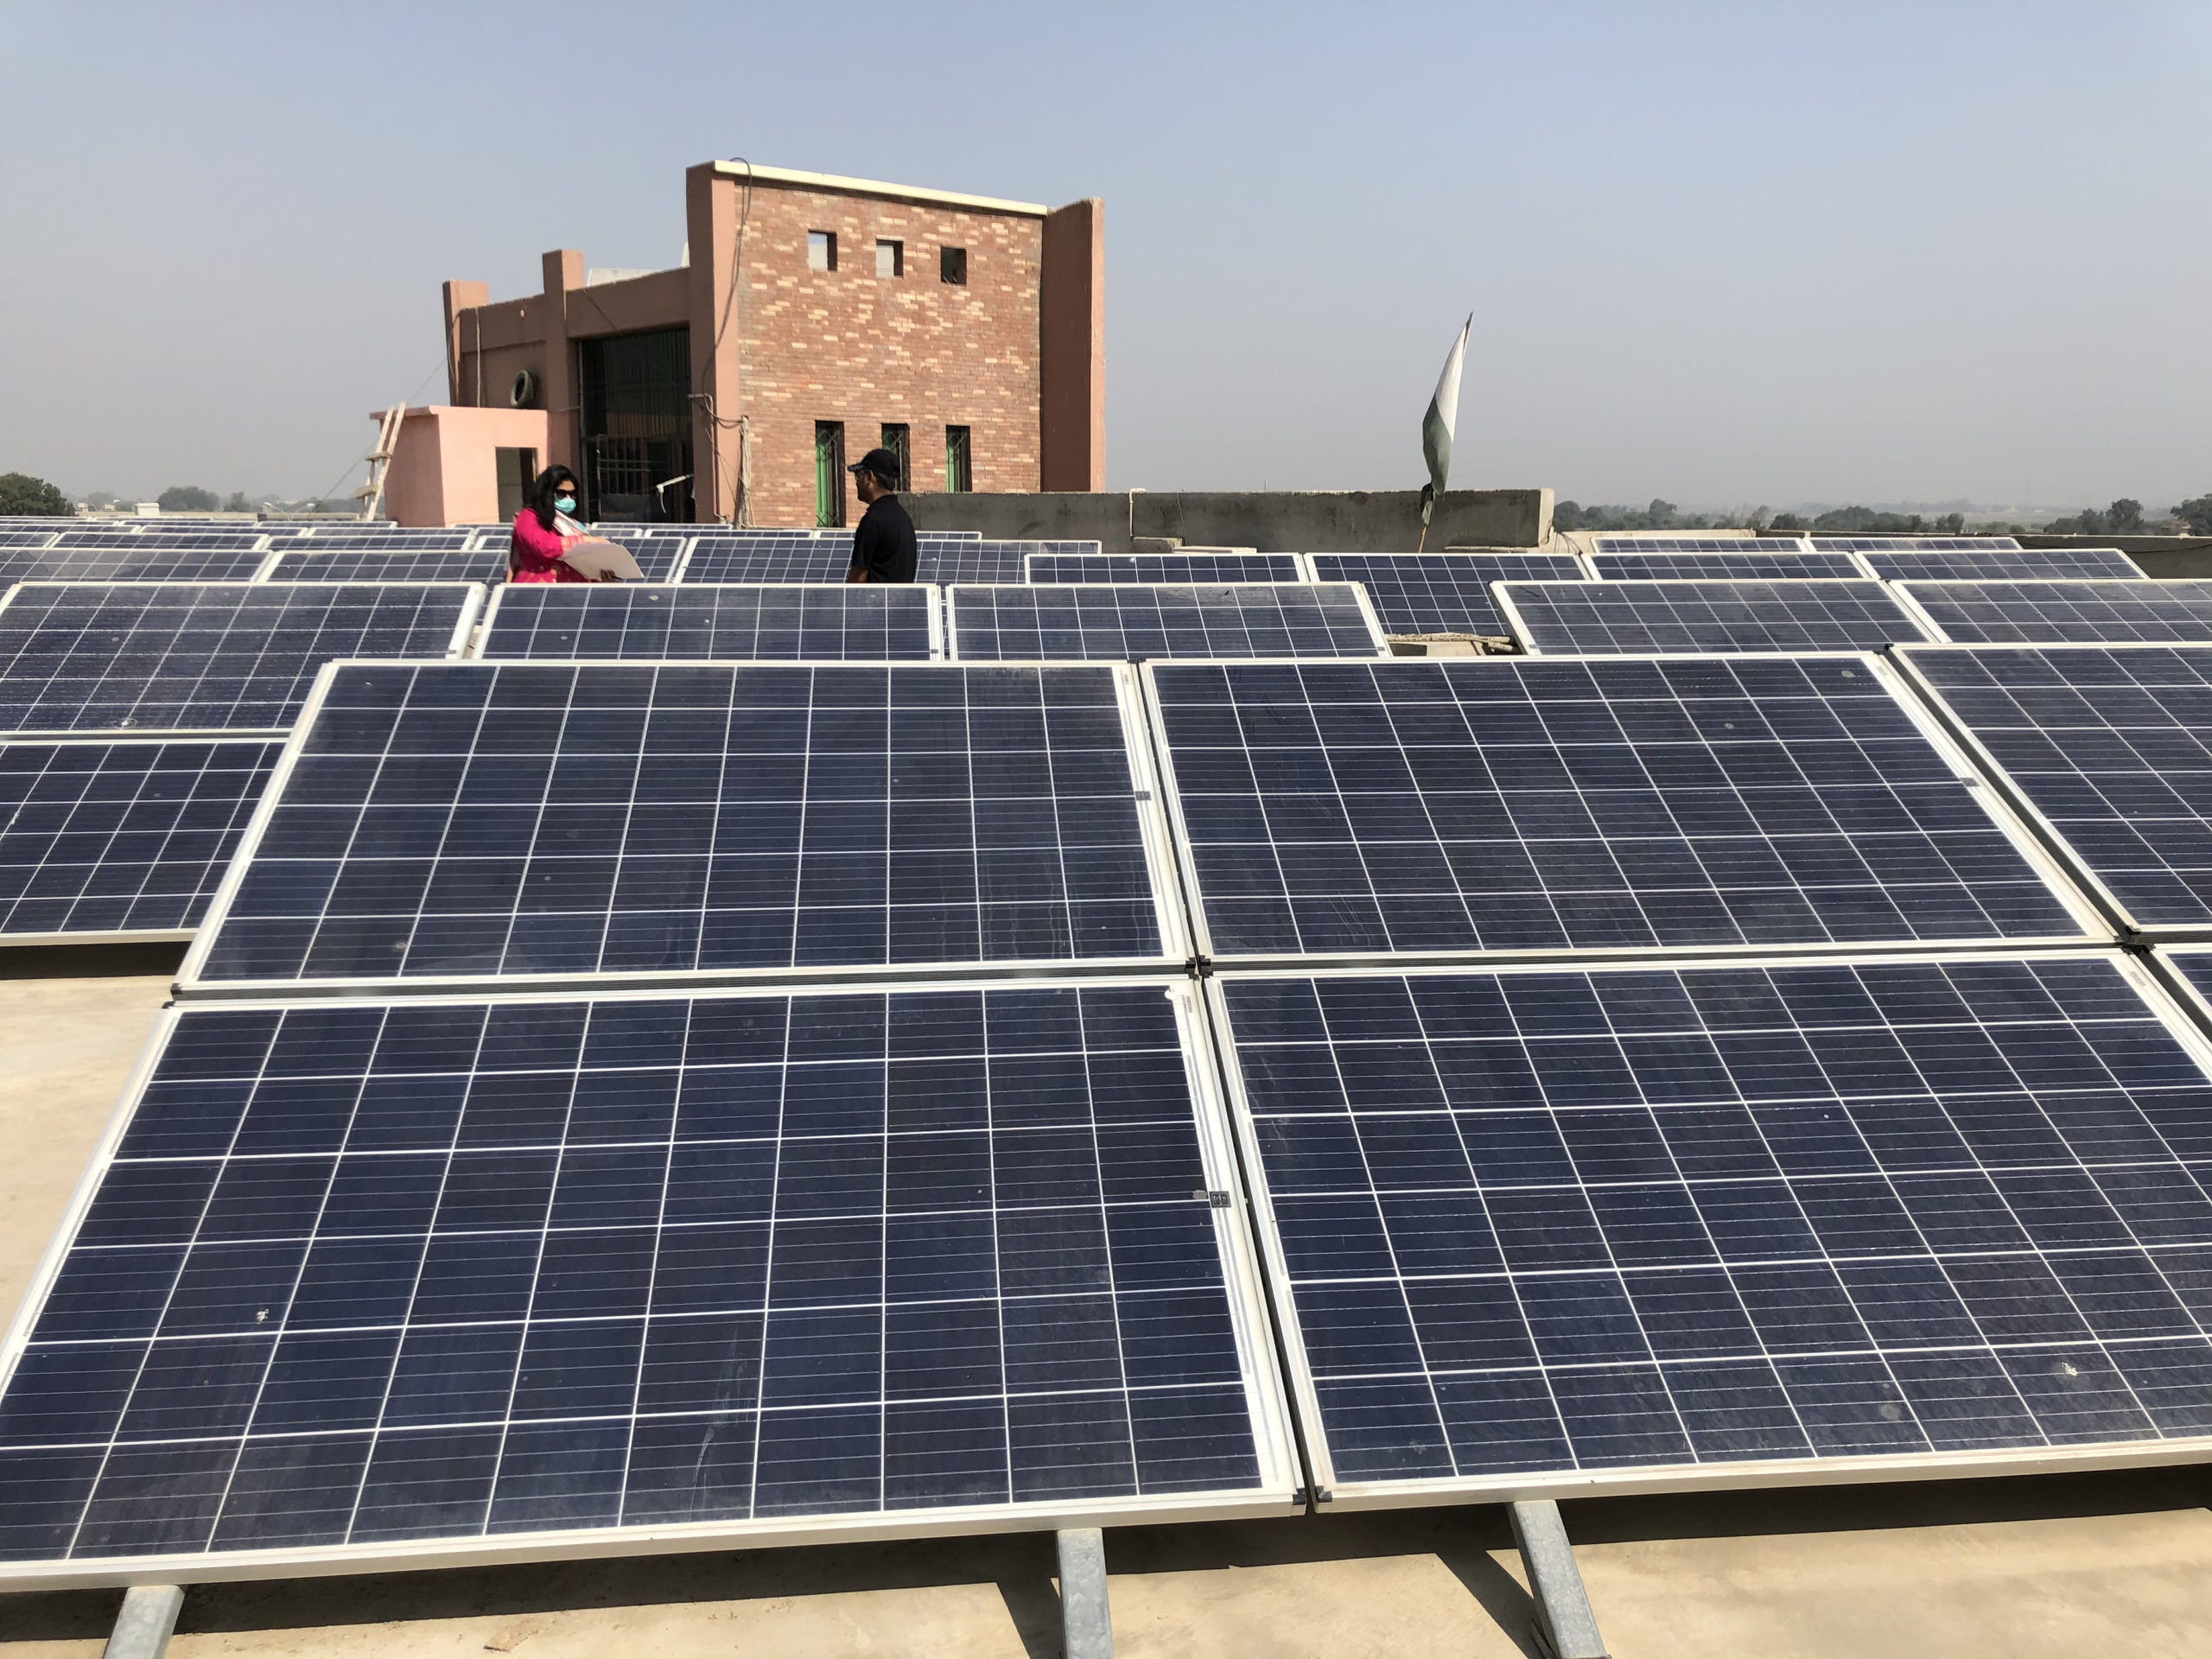 <p>The 144 solar panels atop the Marvi Garden Mother and Child Health centre in Hyderabad, Sindh [Image by: Zofeen Ebrahim]</p>